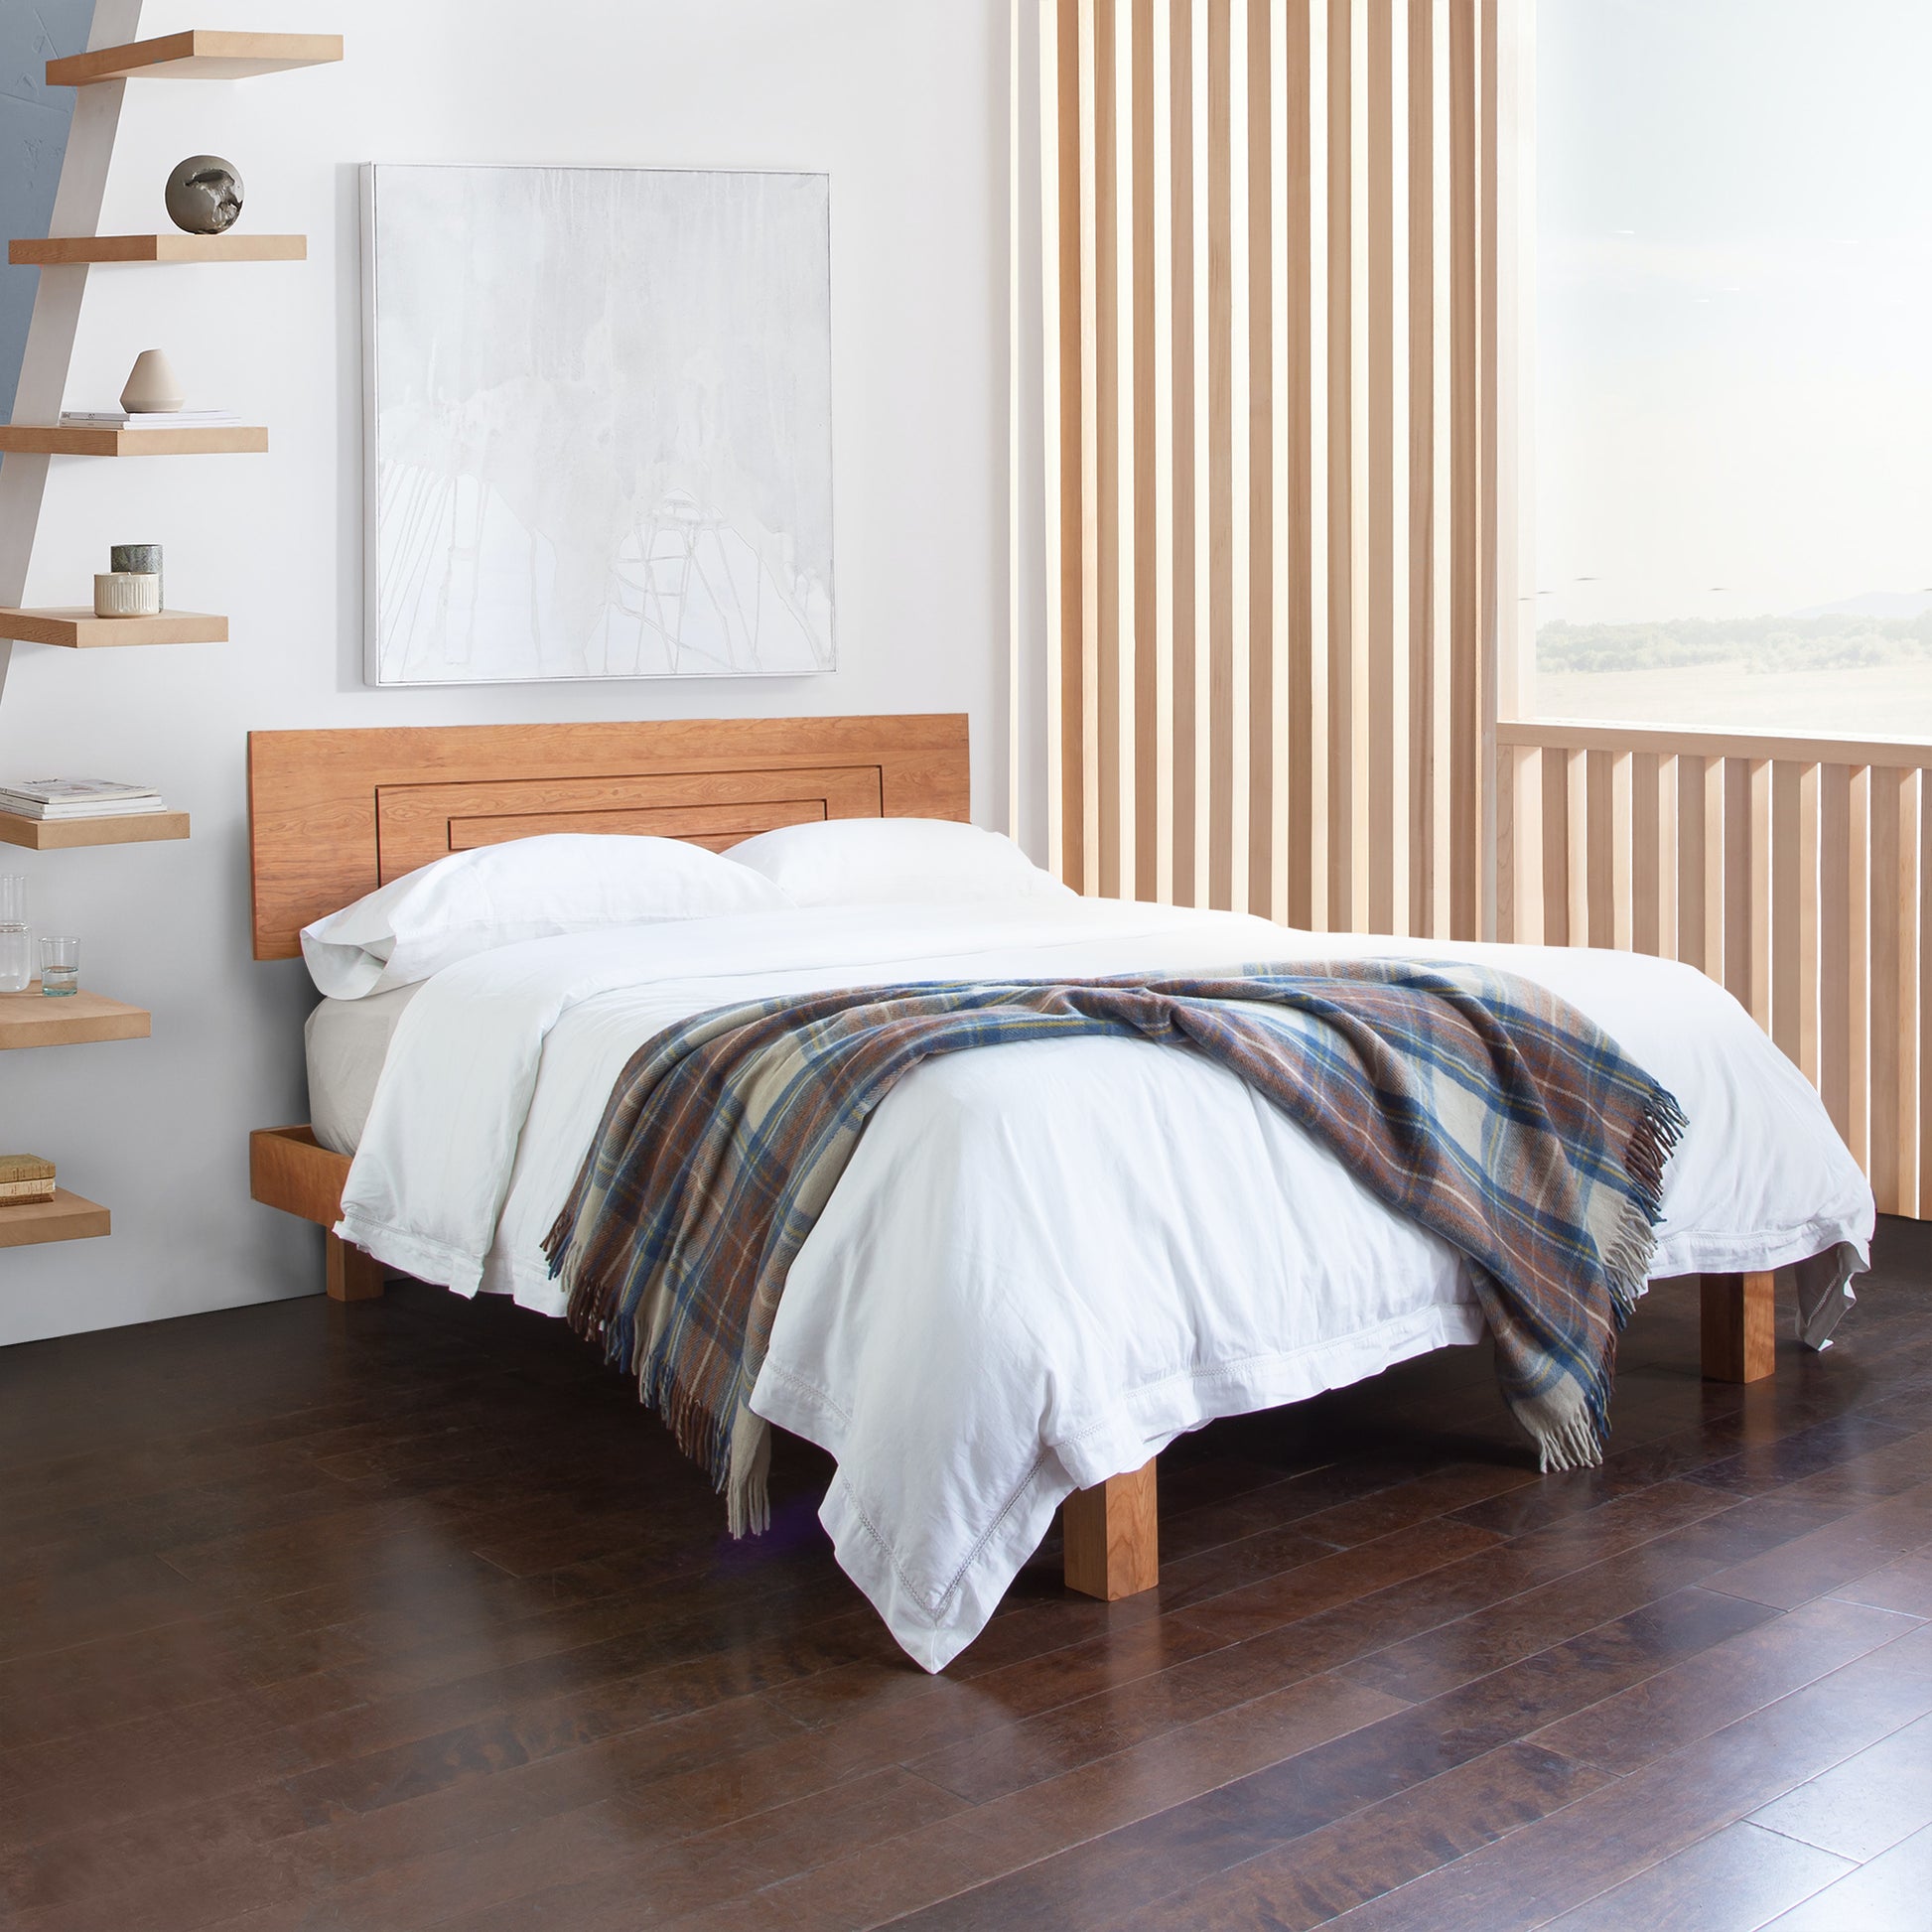 A modern Vermont Furniture Designs loft bed in a bedroom with sustainable wood floors.